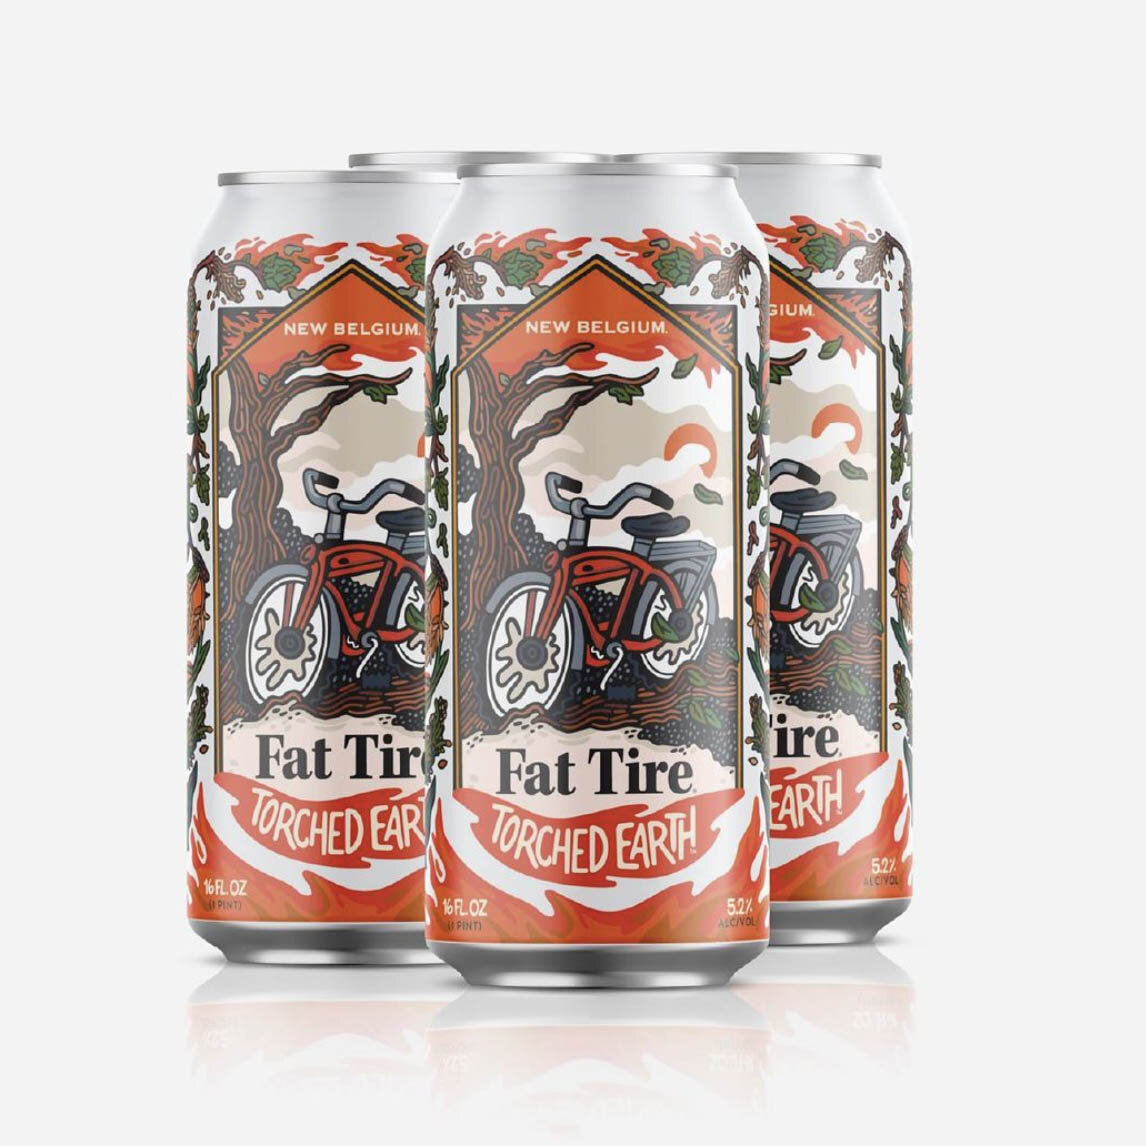 Fat Tire: Torched Earth Ale